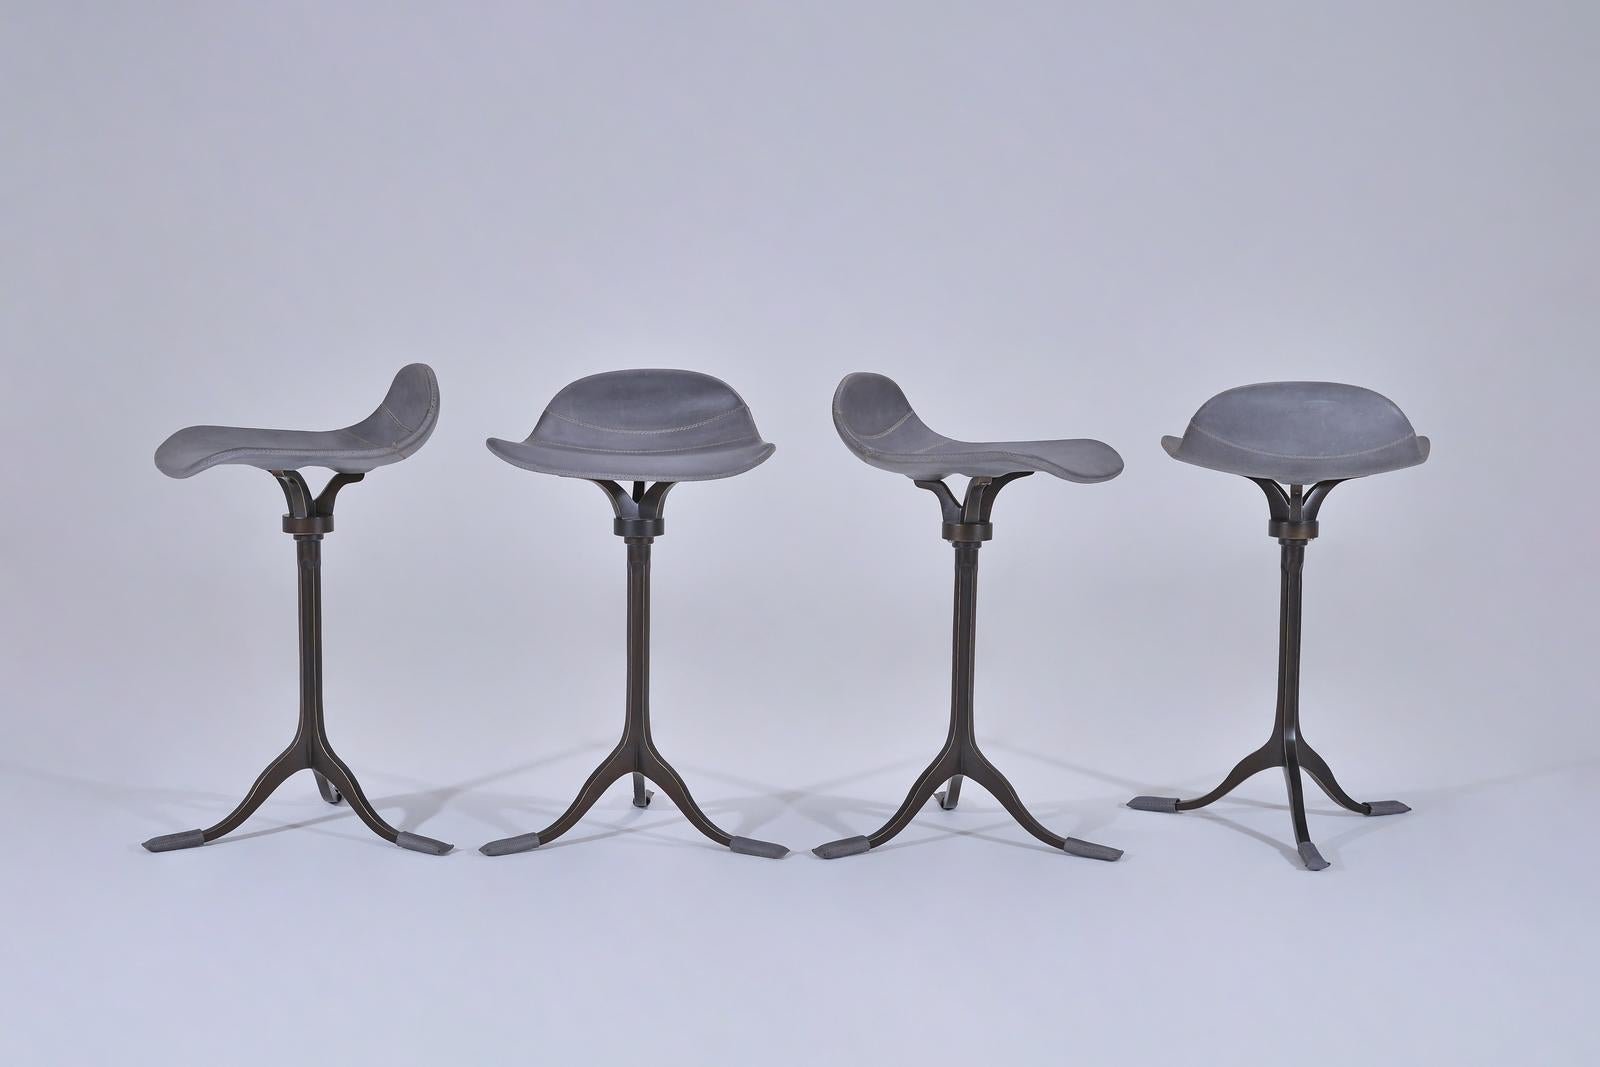 Four Counter-Height Swivel Stools, Pigeon Leather, Brown Brass by P. Tendercool In New Condition For Sale In Bangkok, TH